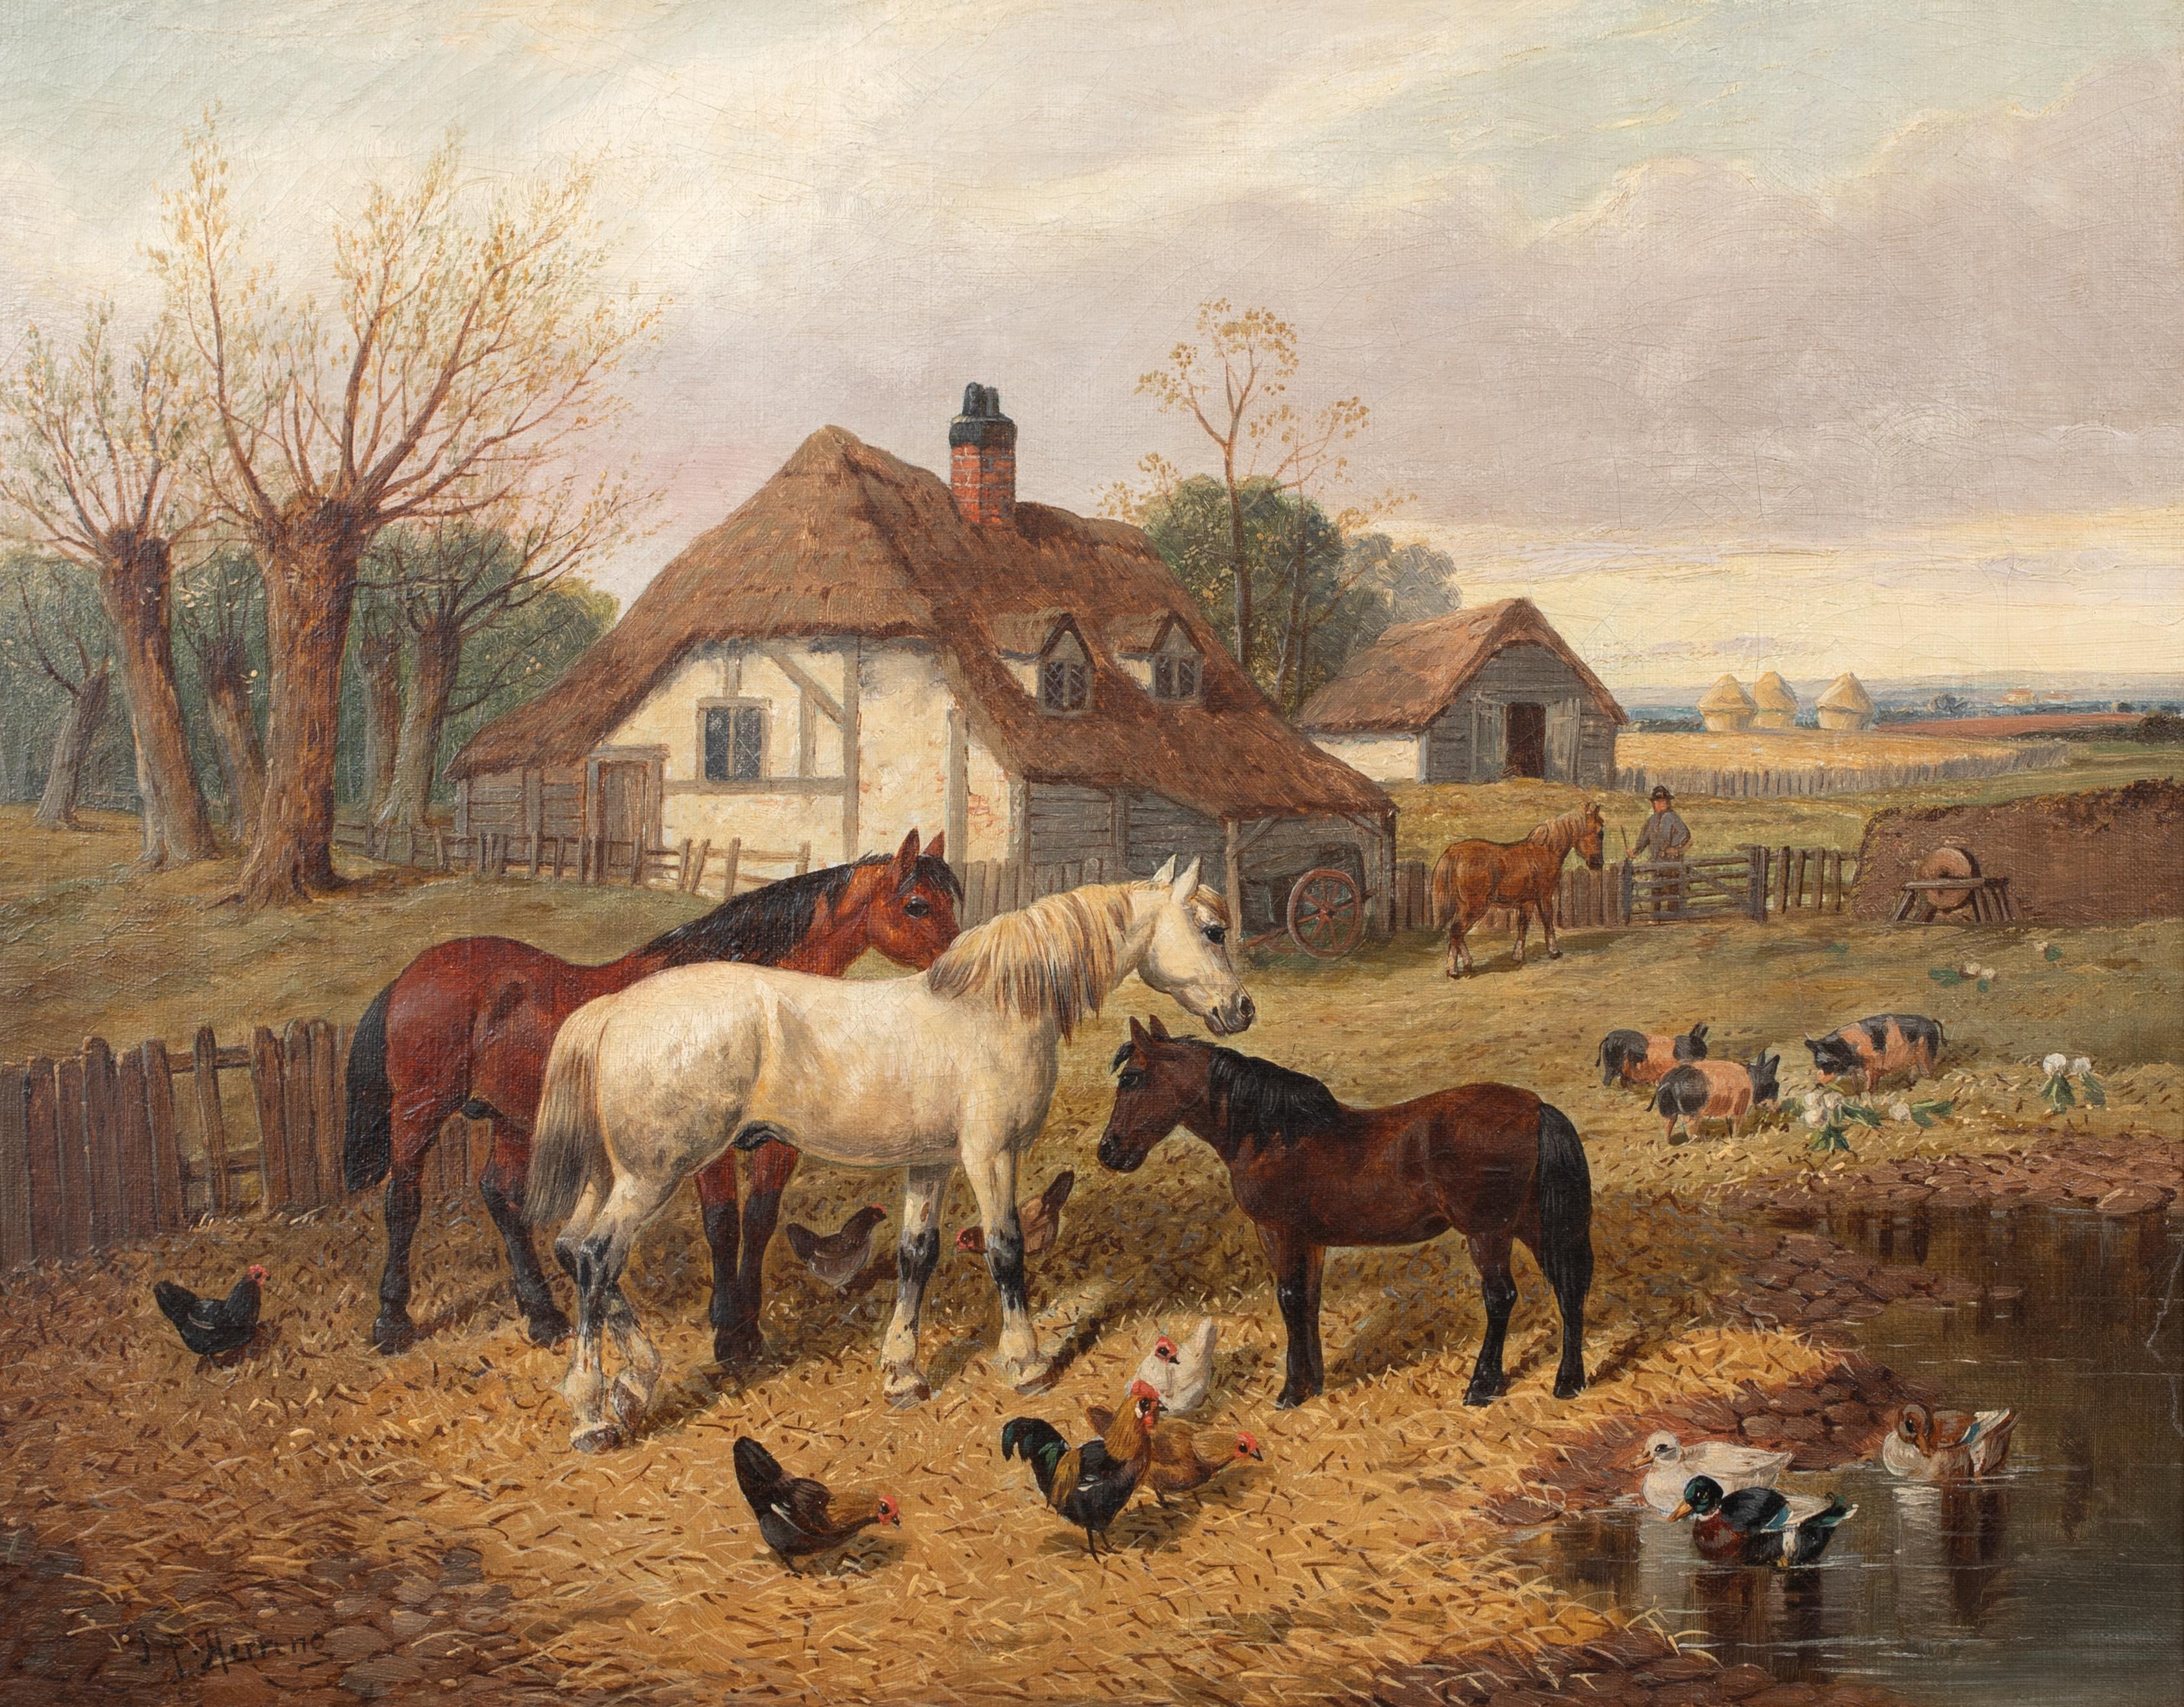 Horses, Chickens & Pigs On The Farm, 17th Century 

by John Frederick II HERRING (1815-1907) sales to $250,000

Large 19th Century English landscape of horses, chickens and pigs on the farm yard, oil on canvas by John Frederick Herring. Excellent